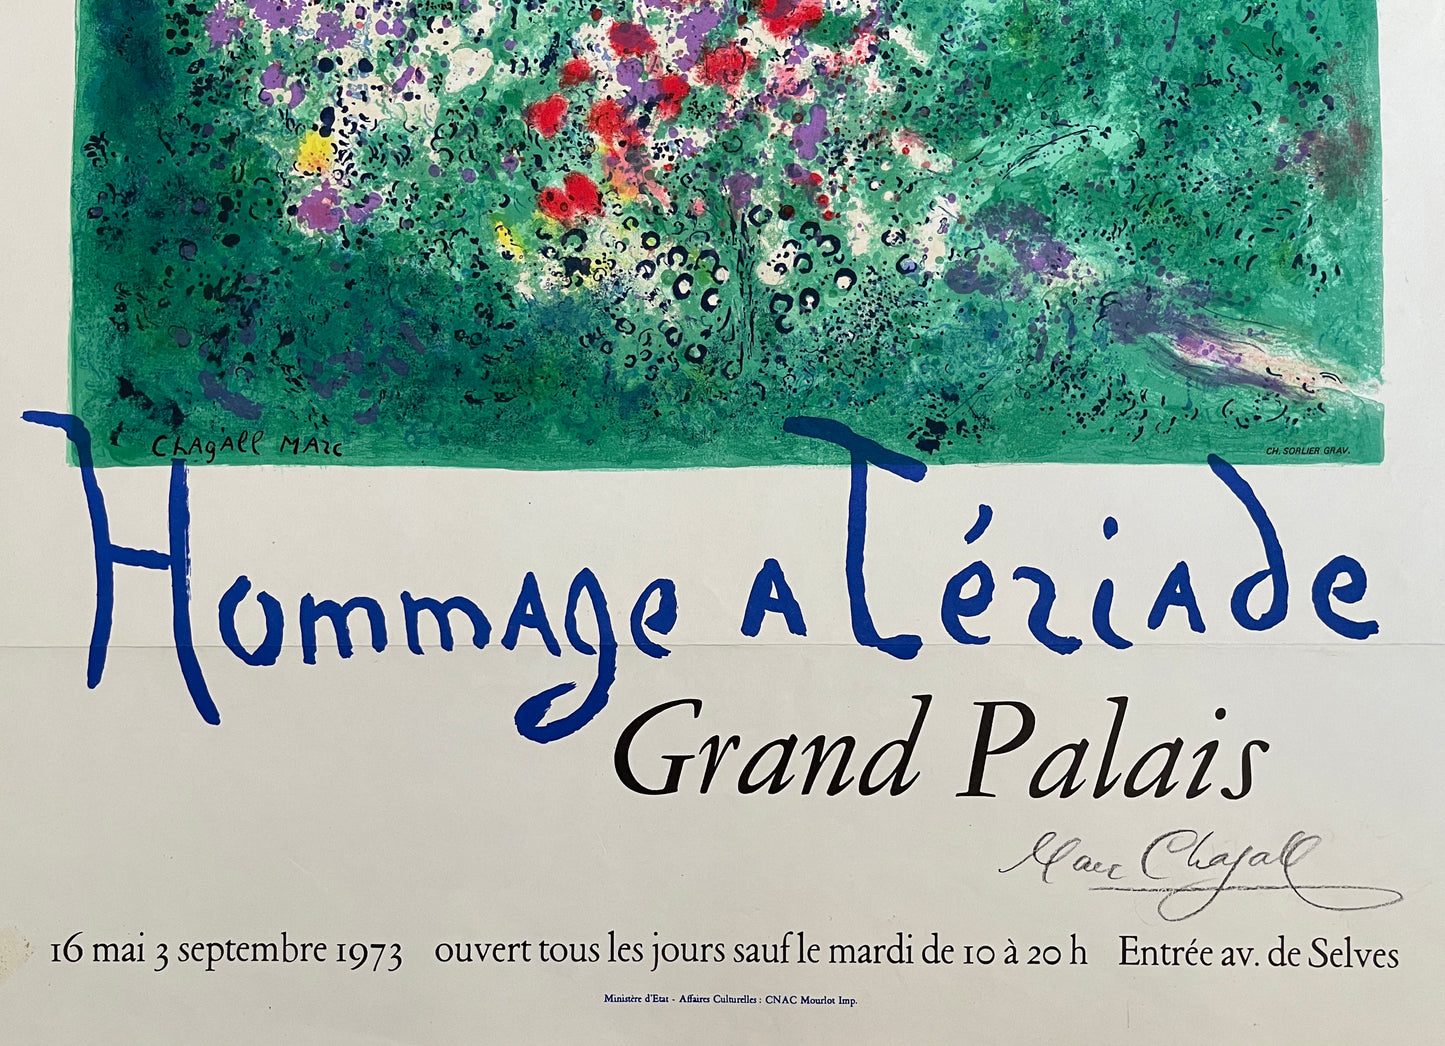 Marc Chagall Signed Exhibition Poster: "Hommage a Tériade, Grand Palais", 1973